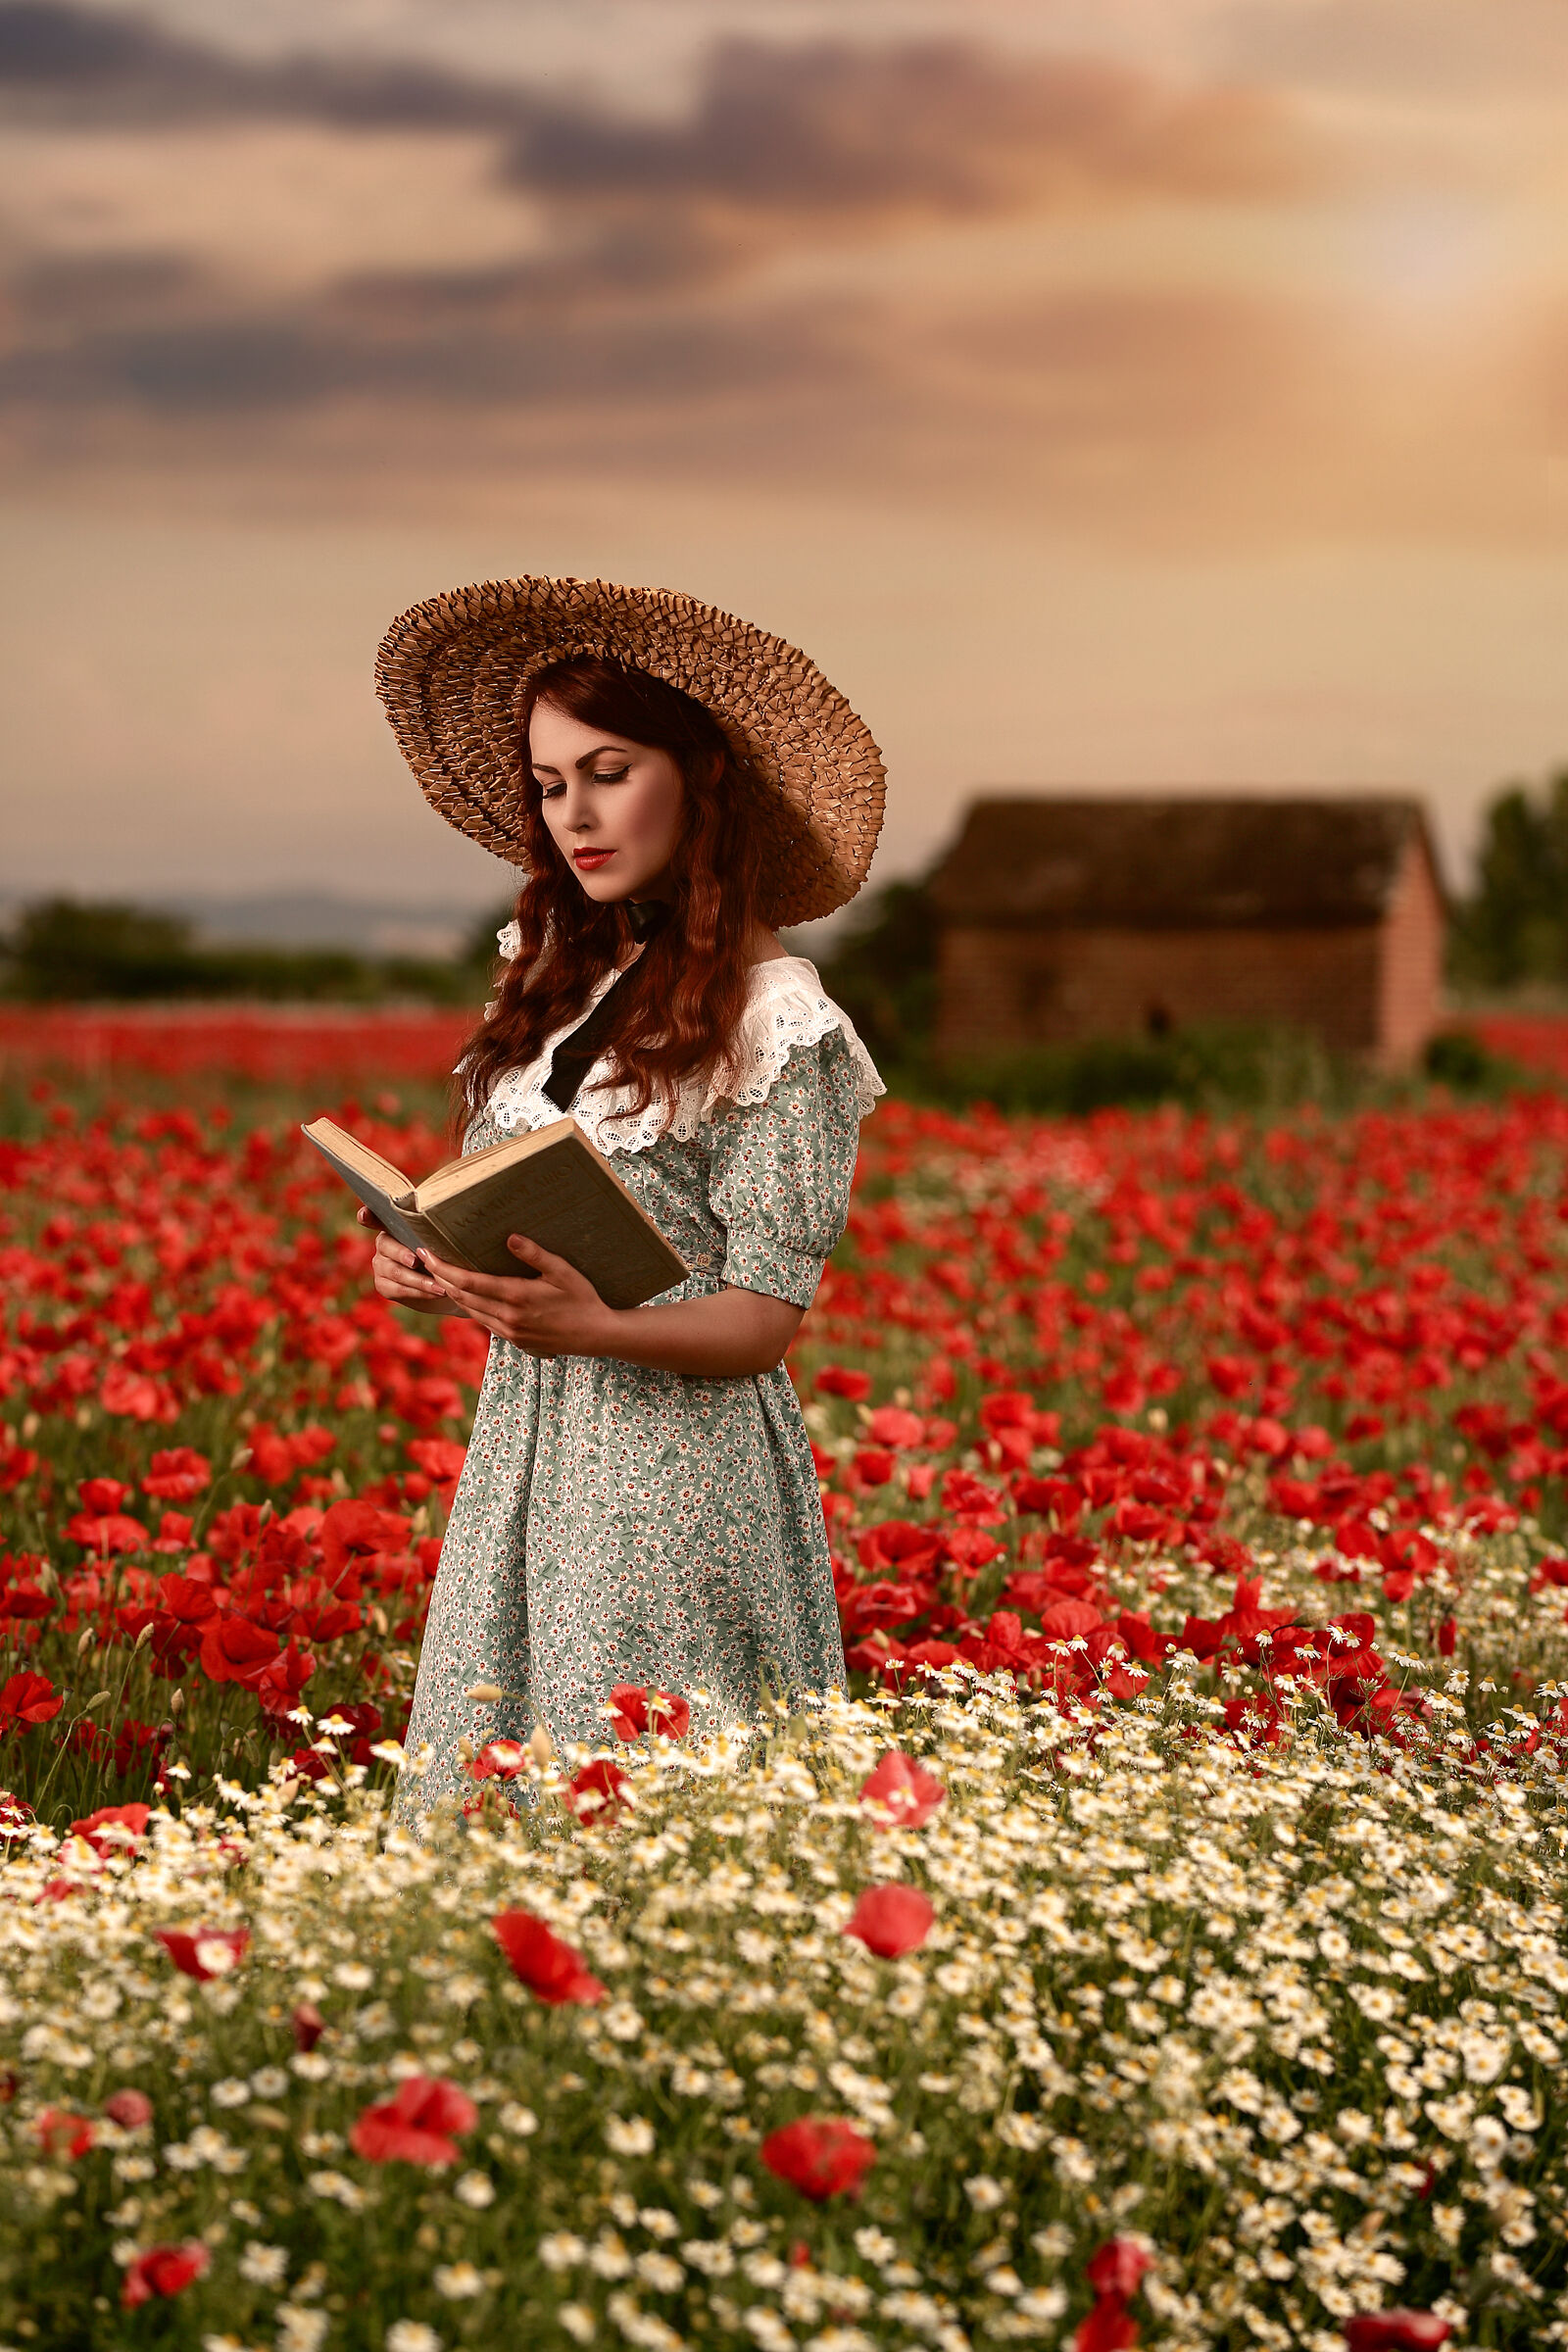 Reading among the poppies...